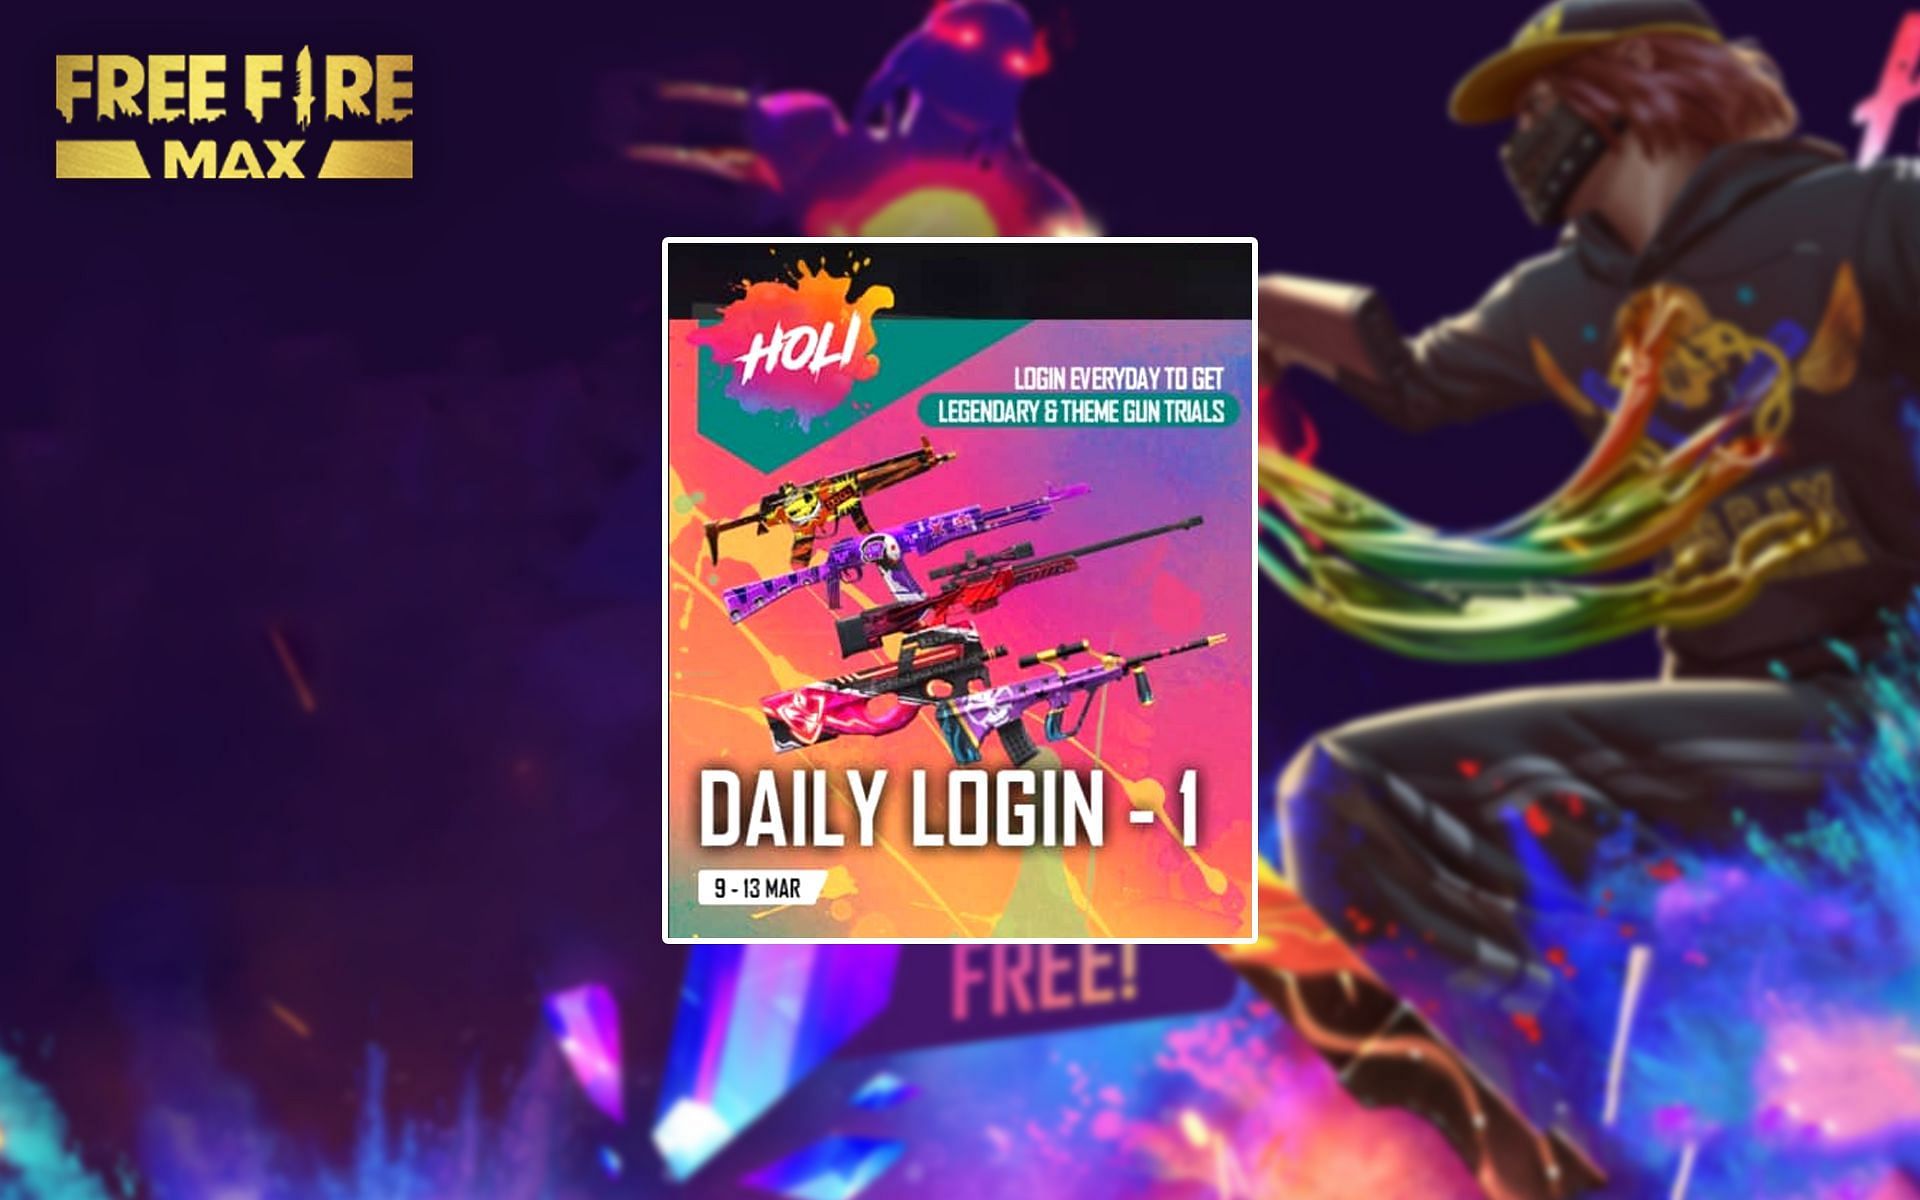 Players can get free gun skins by logging into Free Fire MAX this week (Image via Sportskeeda)